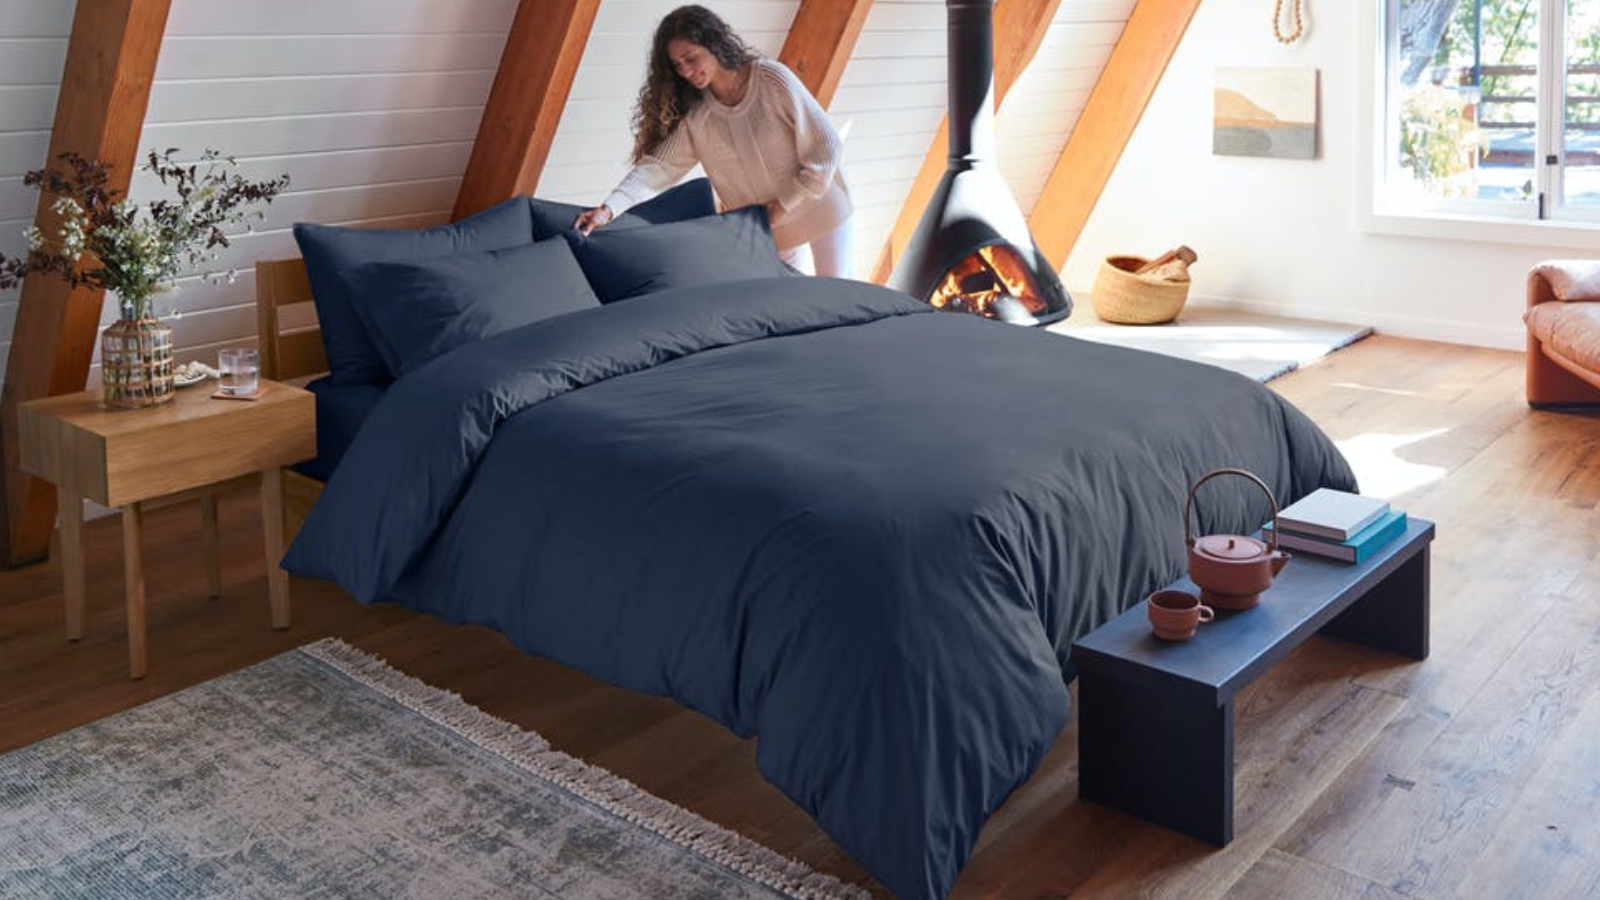 Save 20% on our favorite mattress and more at Tuft & Needle now